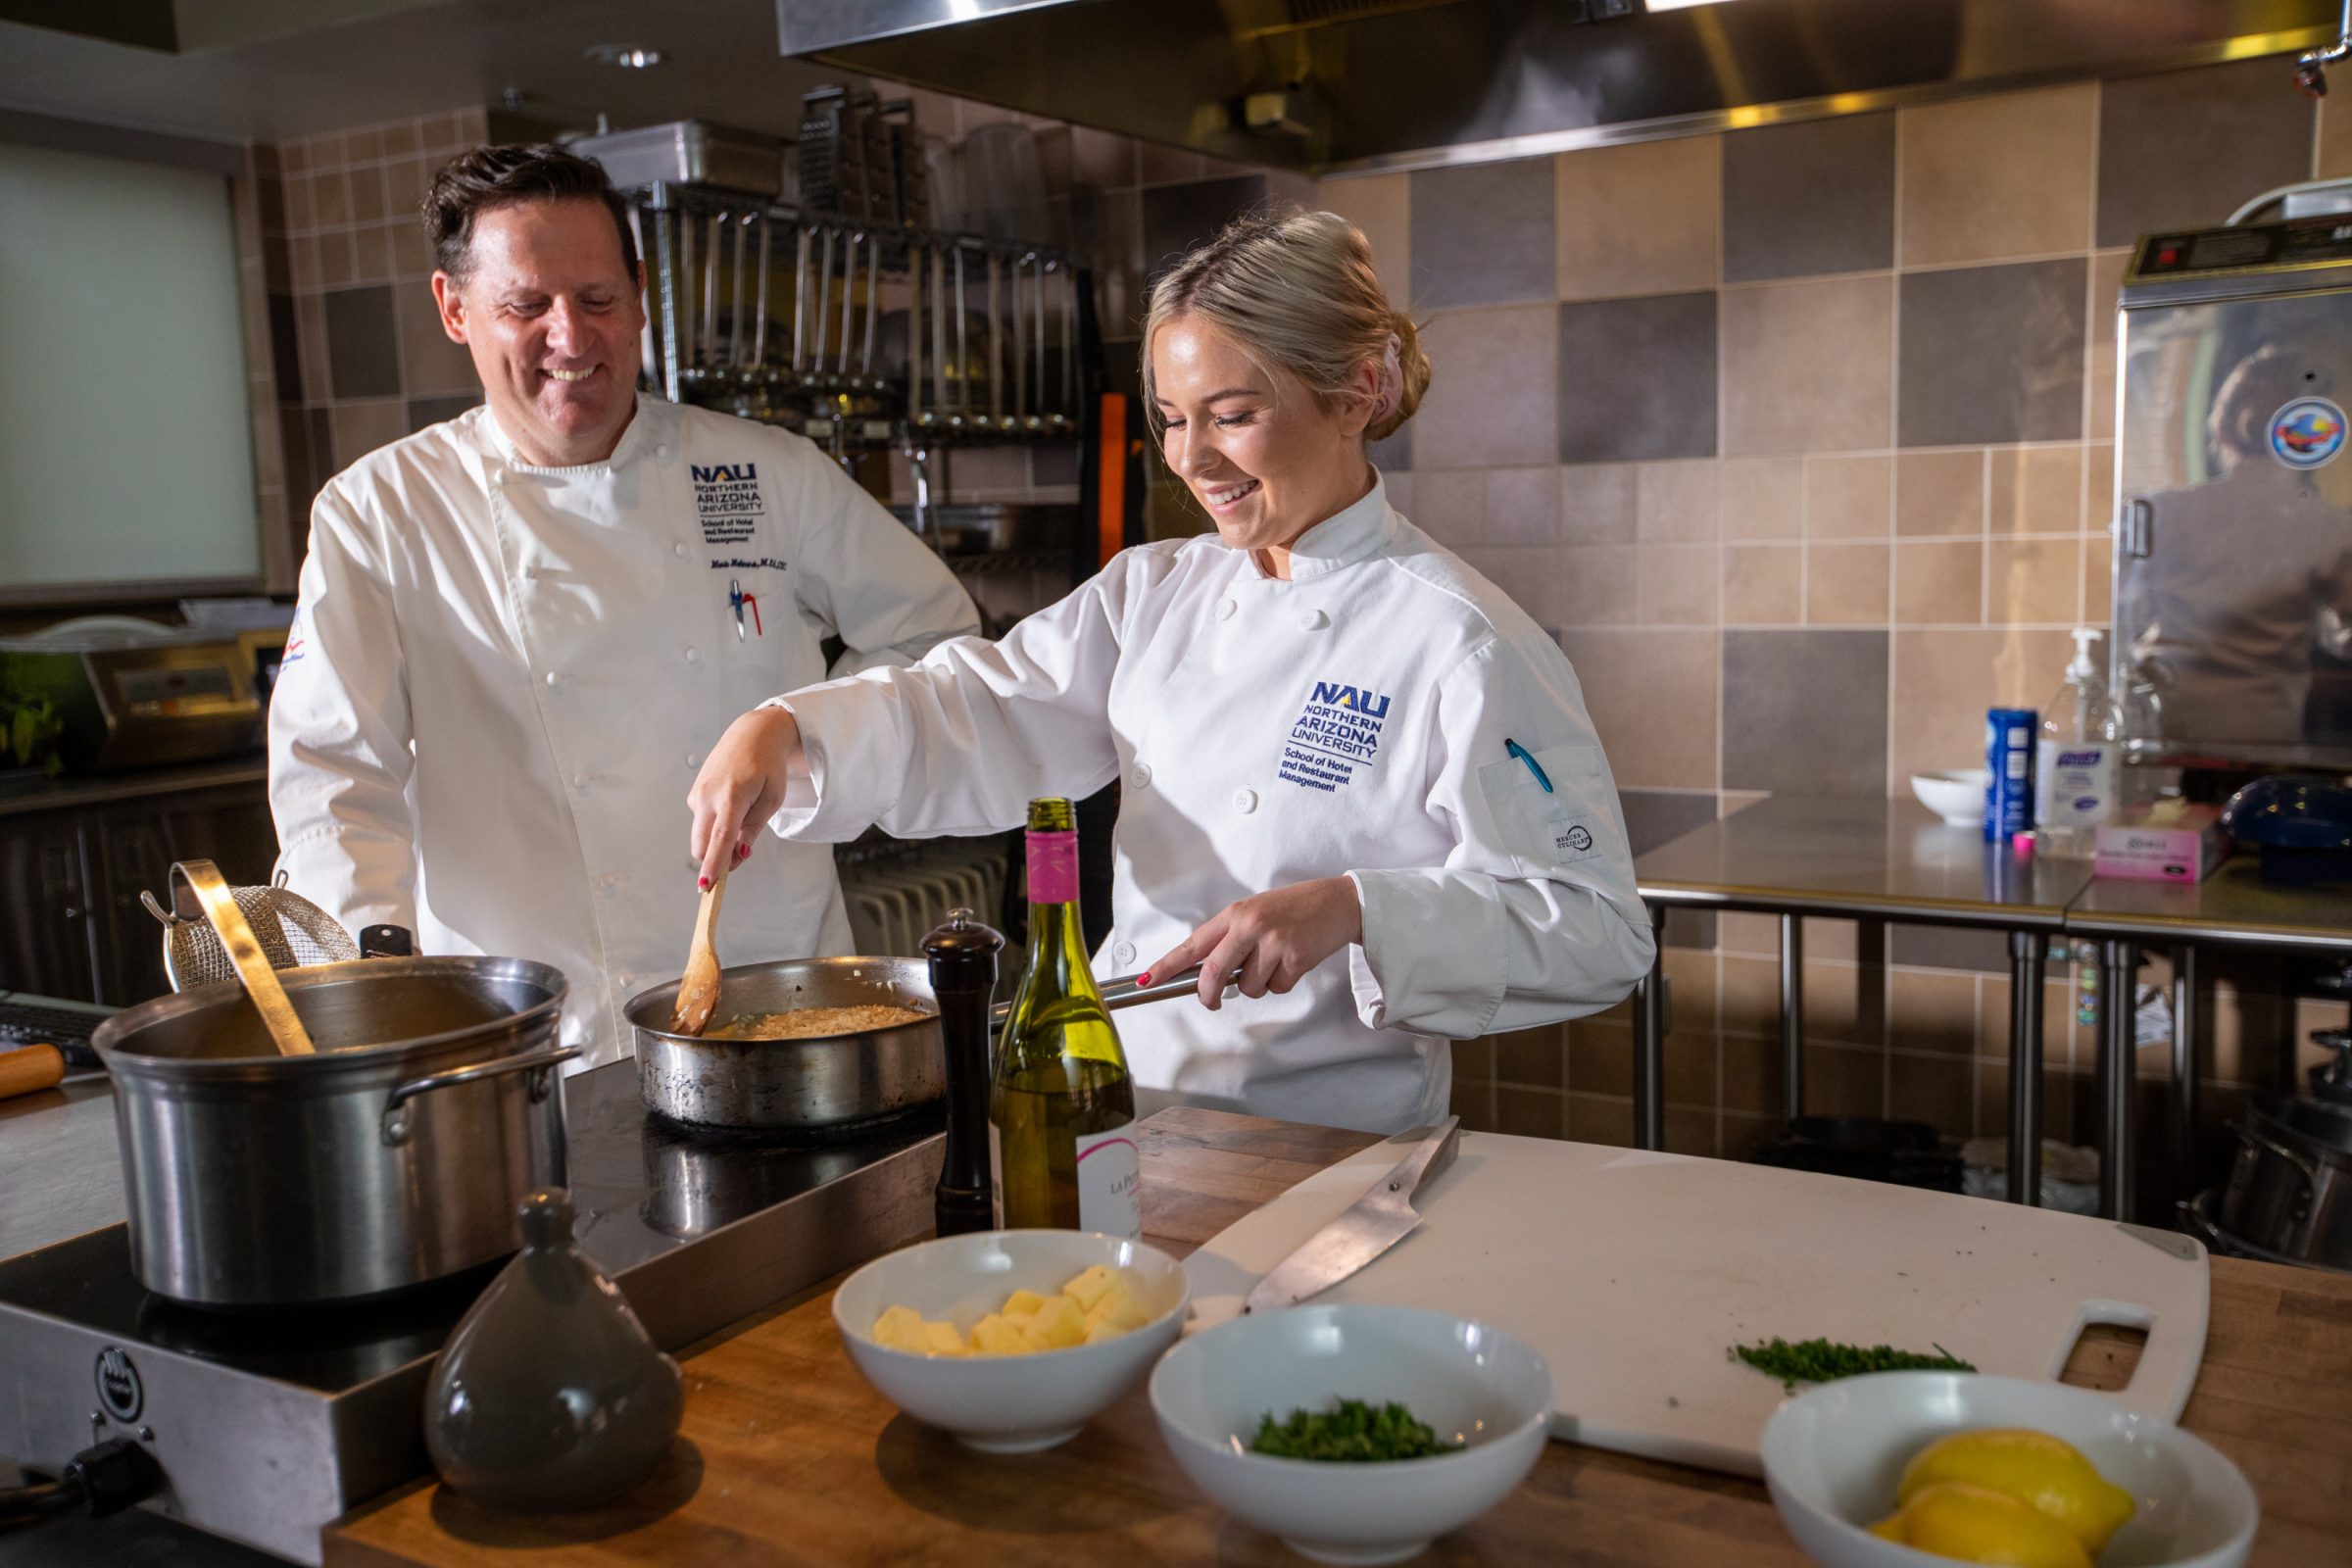 Chef Mark Molinaro teaches an Hotel Restaurant Management student how to cook in the kitchen.